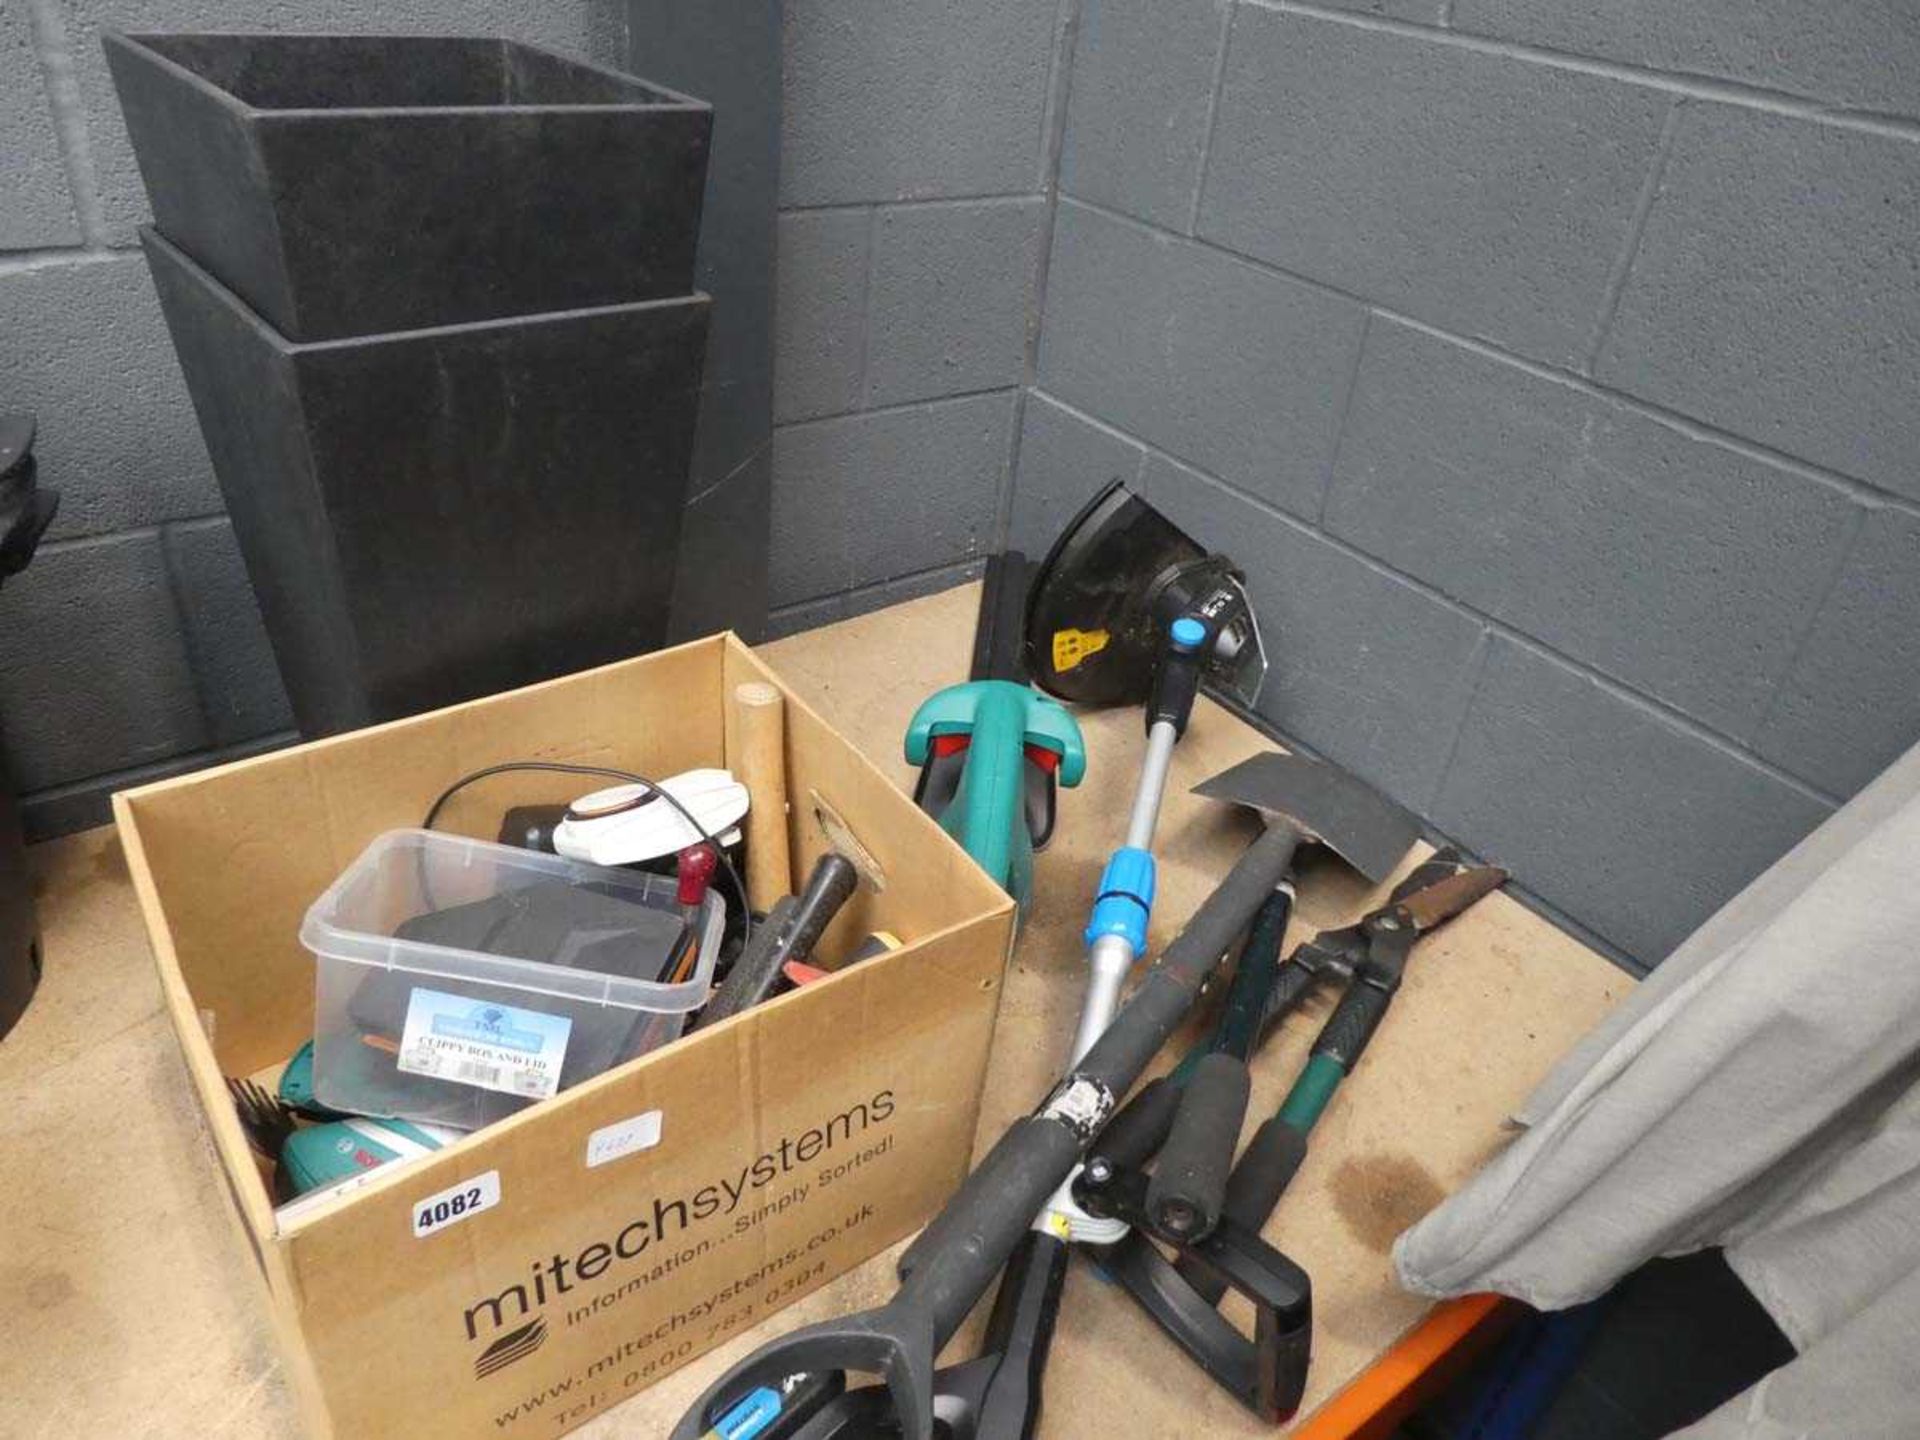 Cardboard box of tools and a Bosch hedge cutter and strimmer